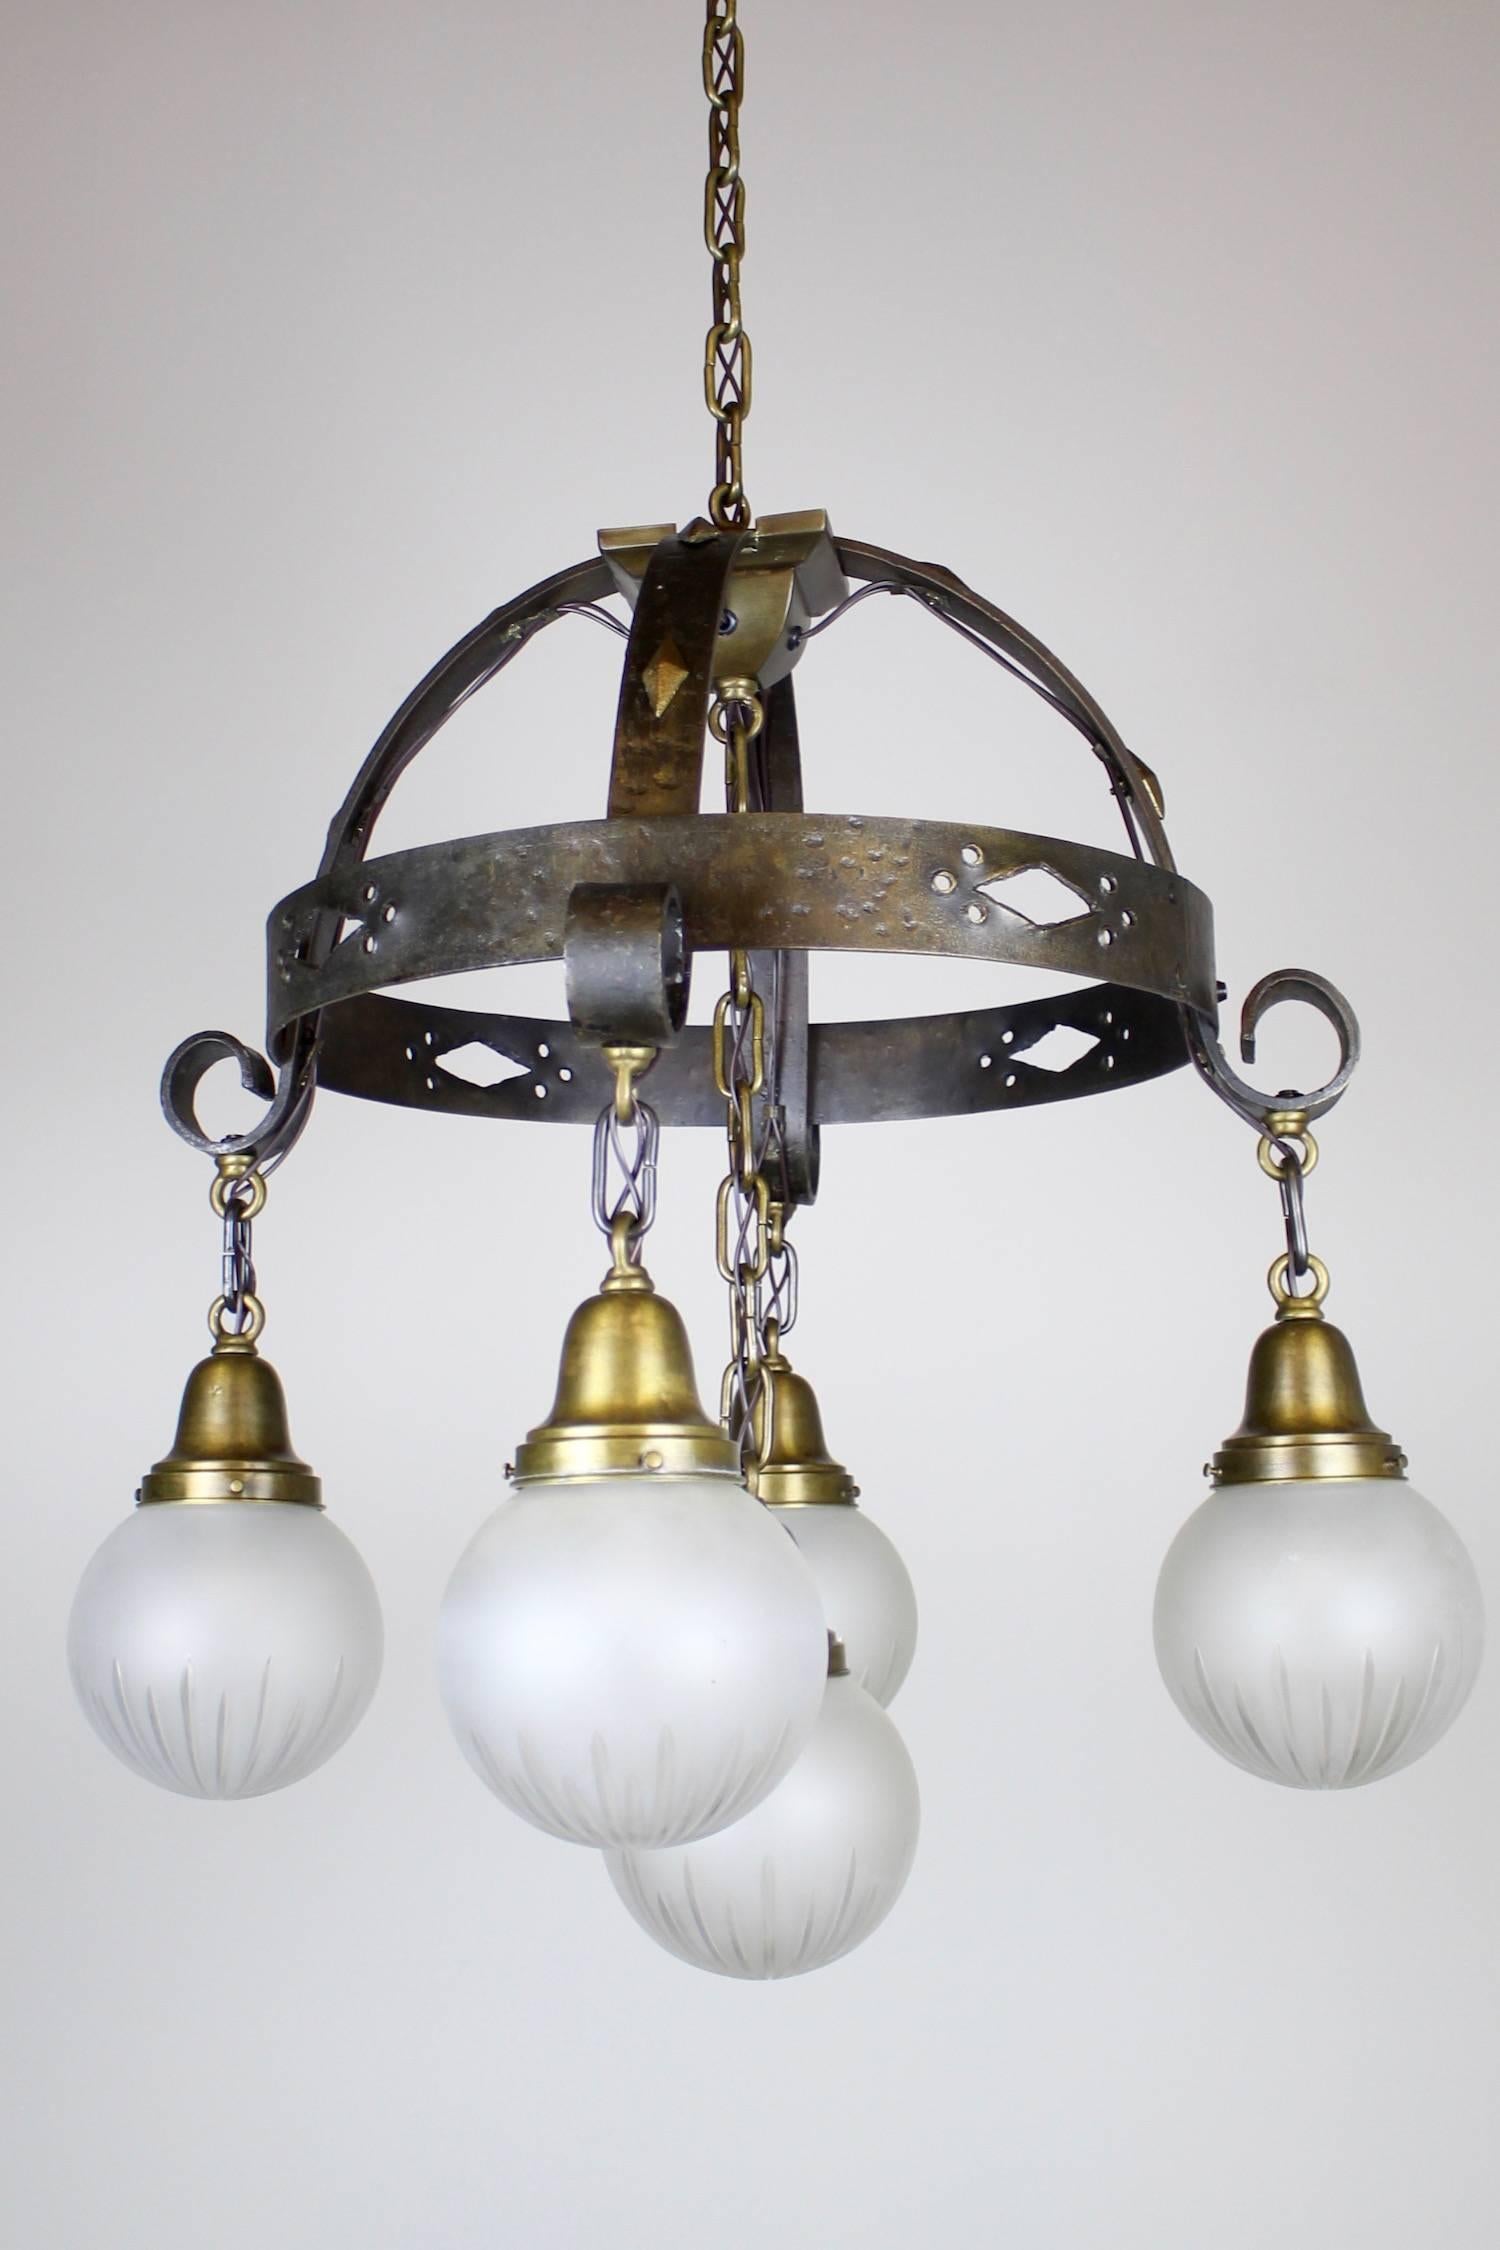 Hammered Iron Arts and Crafts Ring Fixture with Wheel Cut Ball Shades In Excellent Condition For Sale In Vancouver, BC